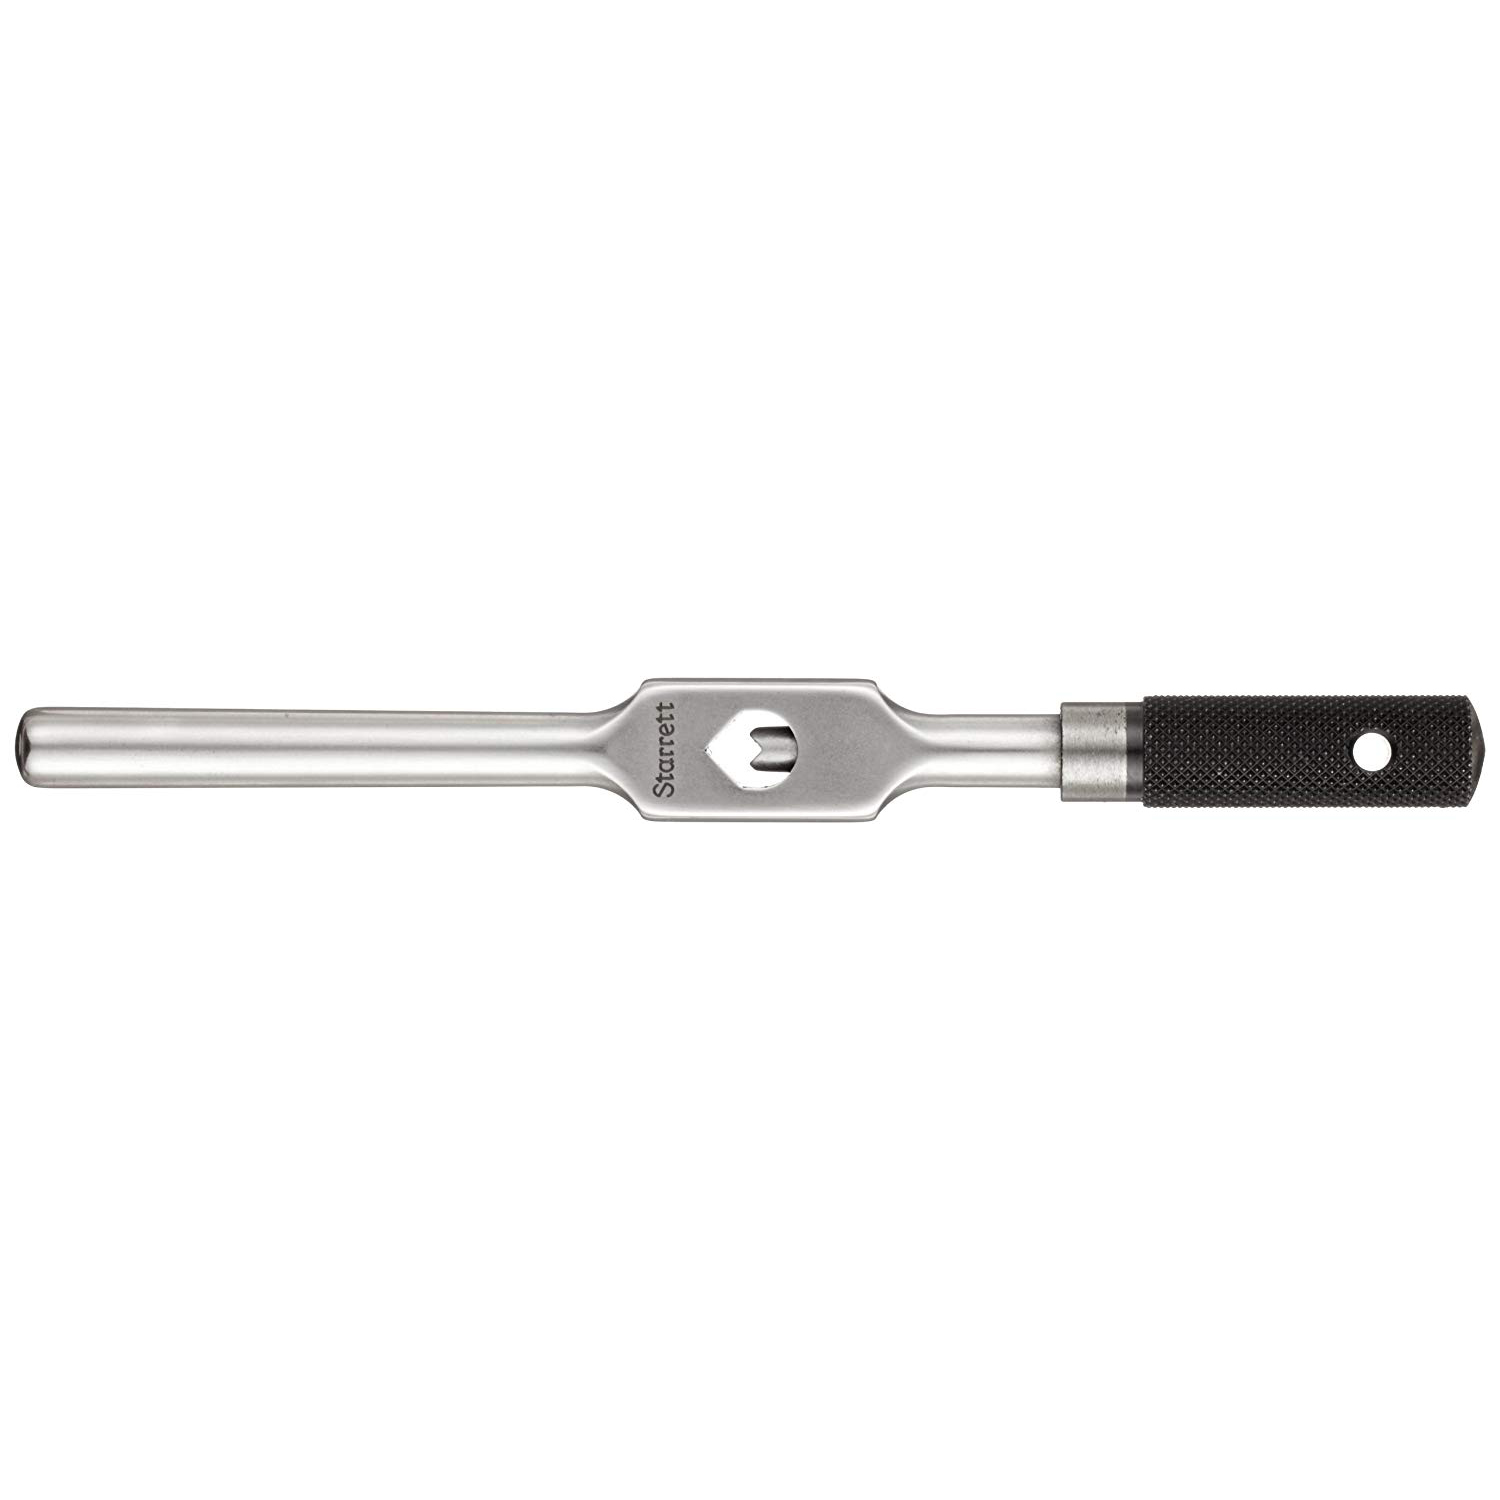 TAP WRENCH 3/16-1/2" 91B 50420